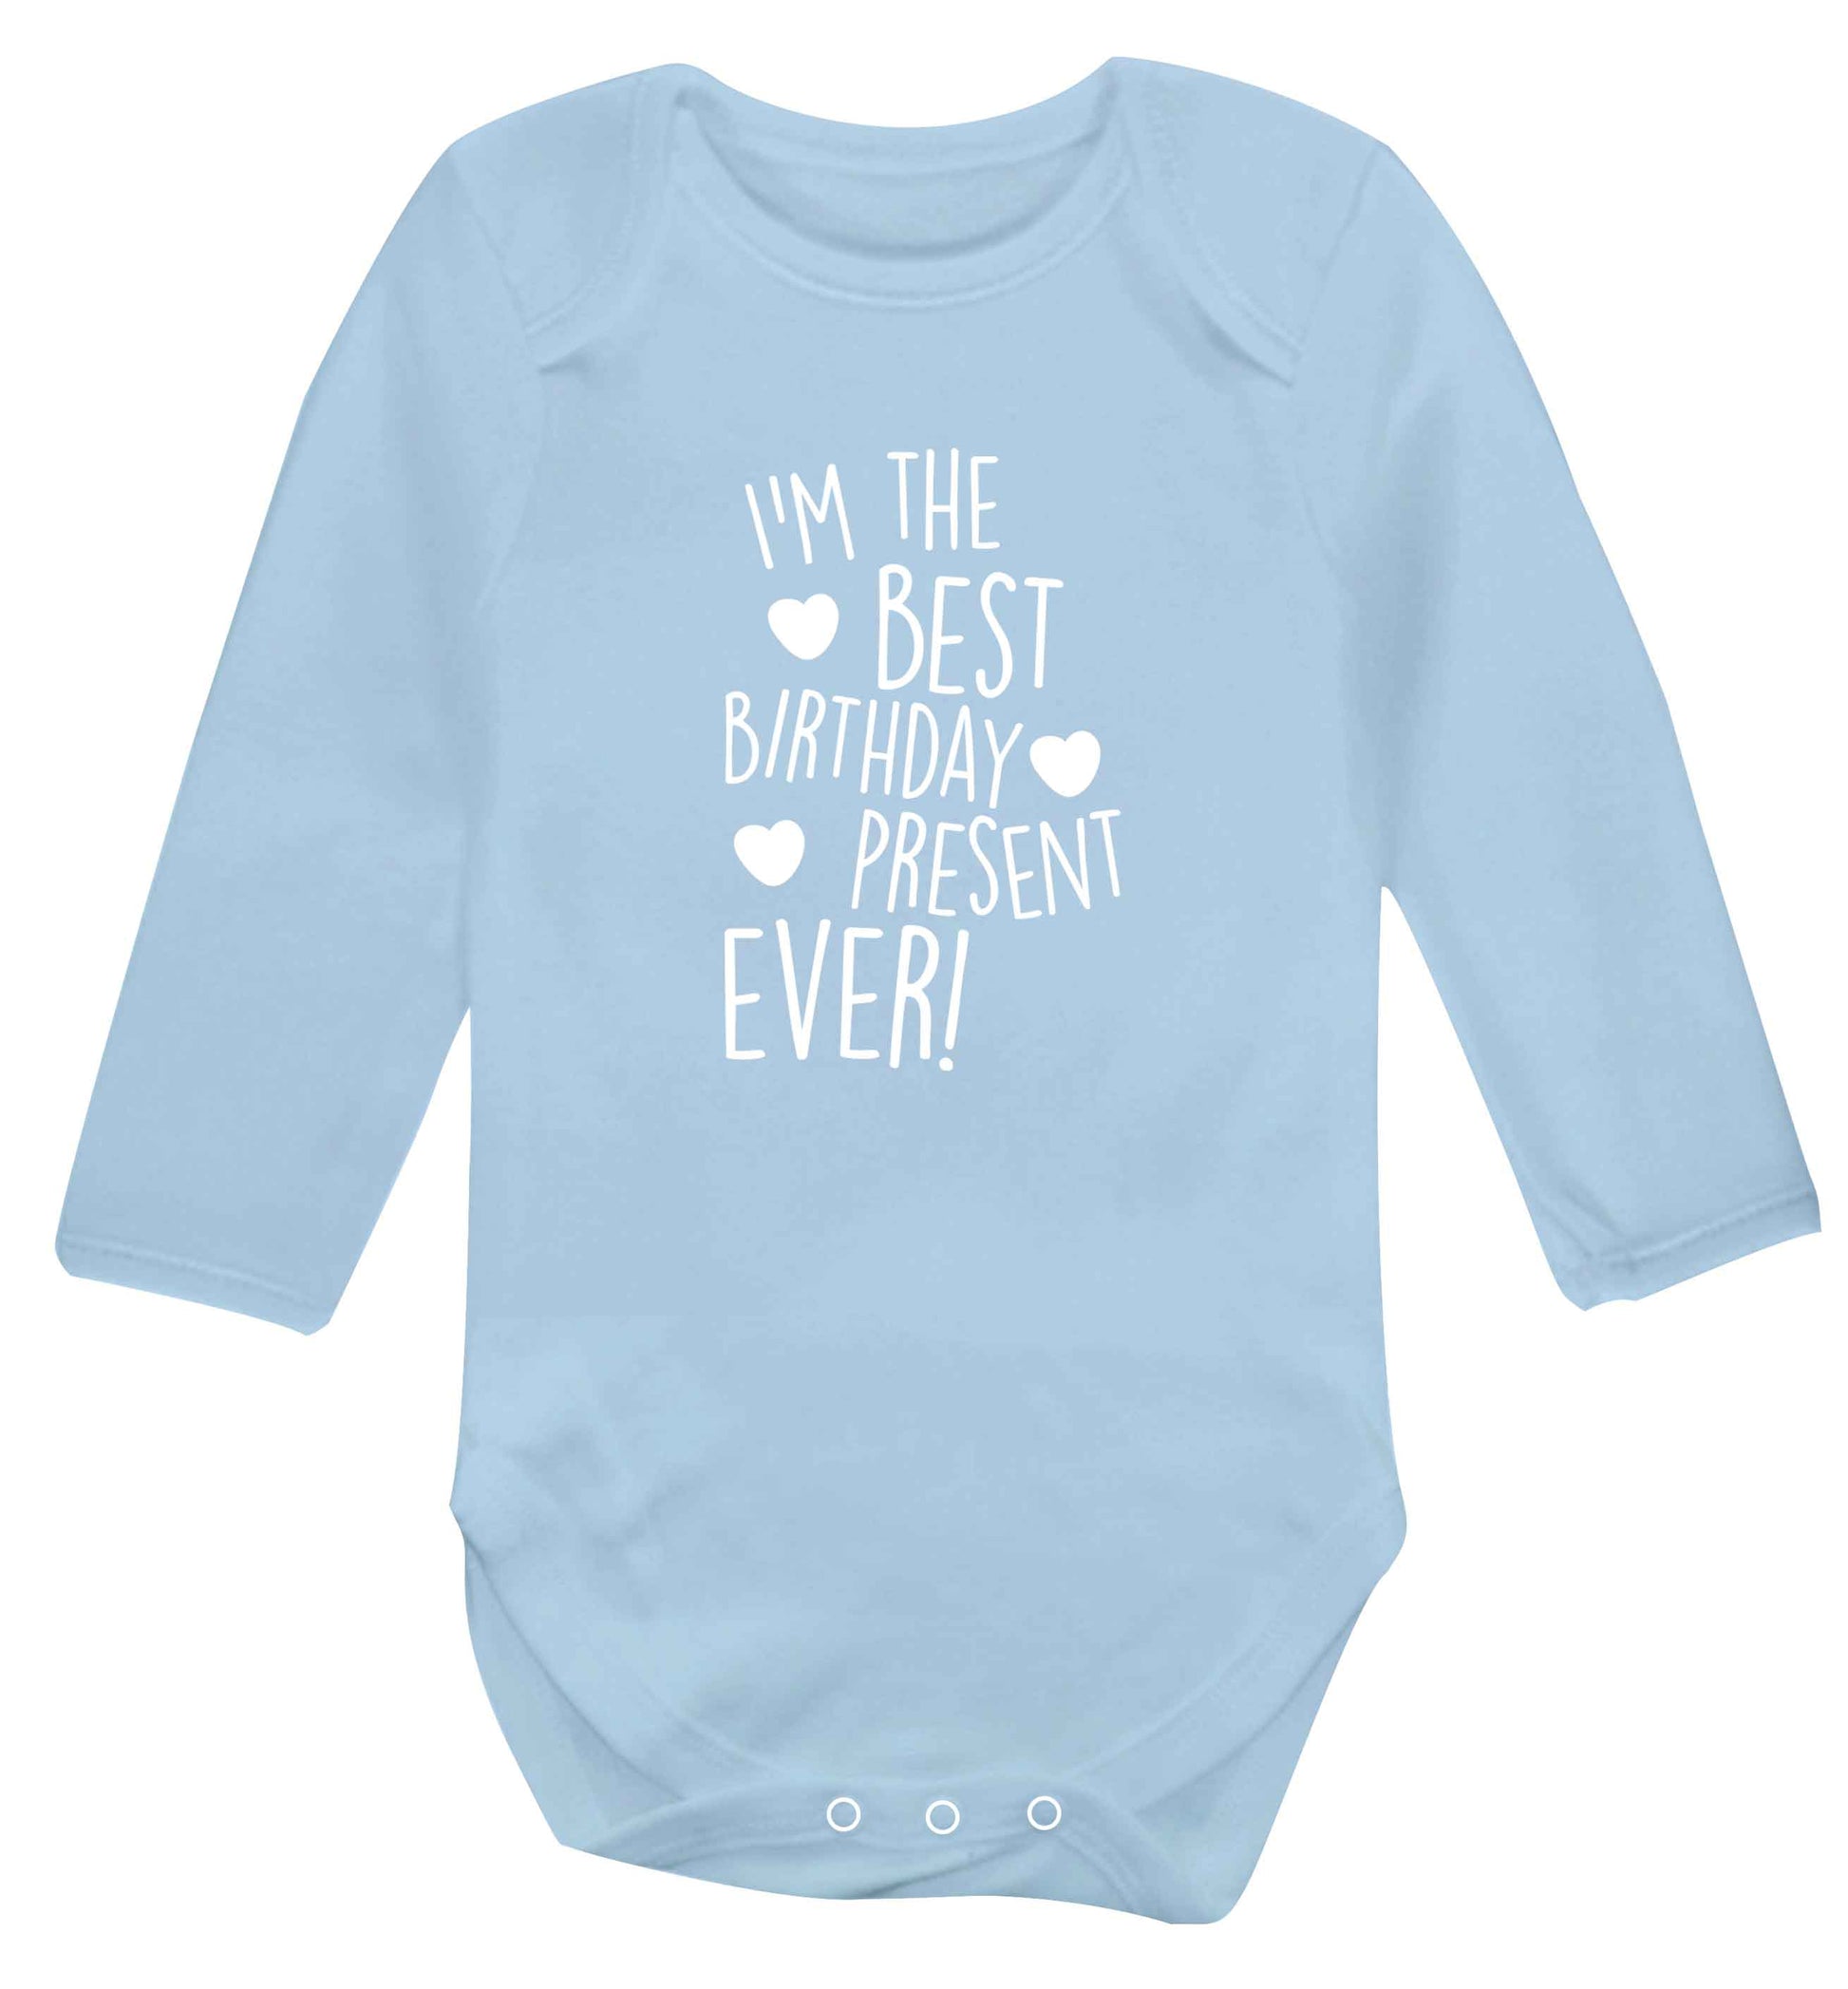 I'm the best birthday present ever baby vest long sleeved pale blue 6-12 months